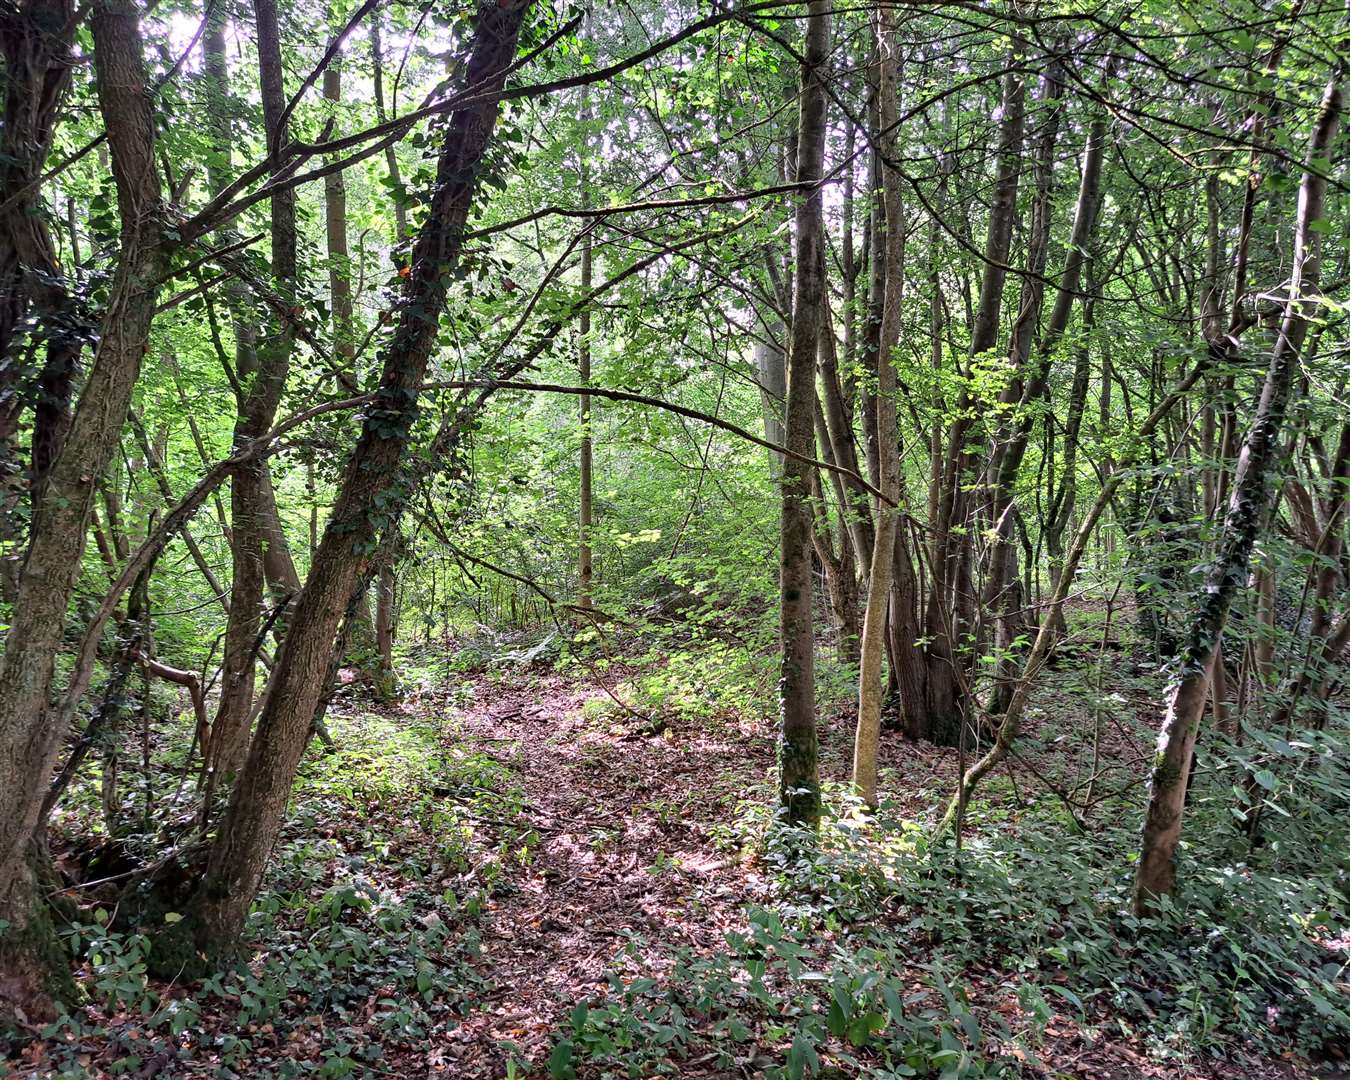 Some 40% of the site is woodland